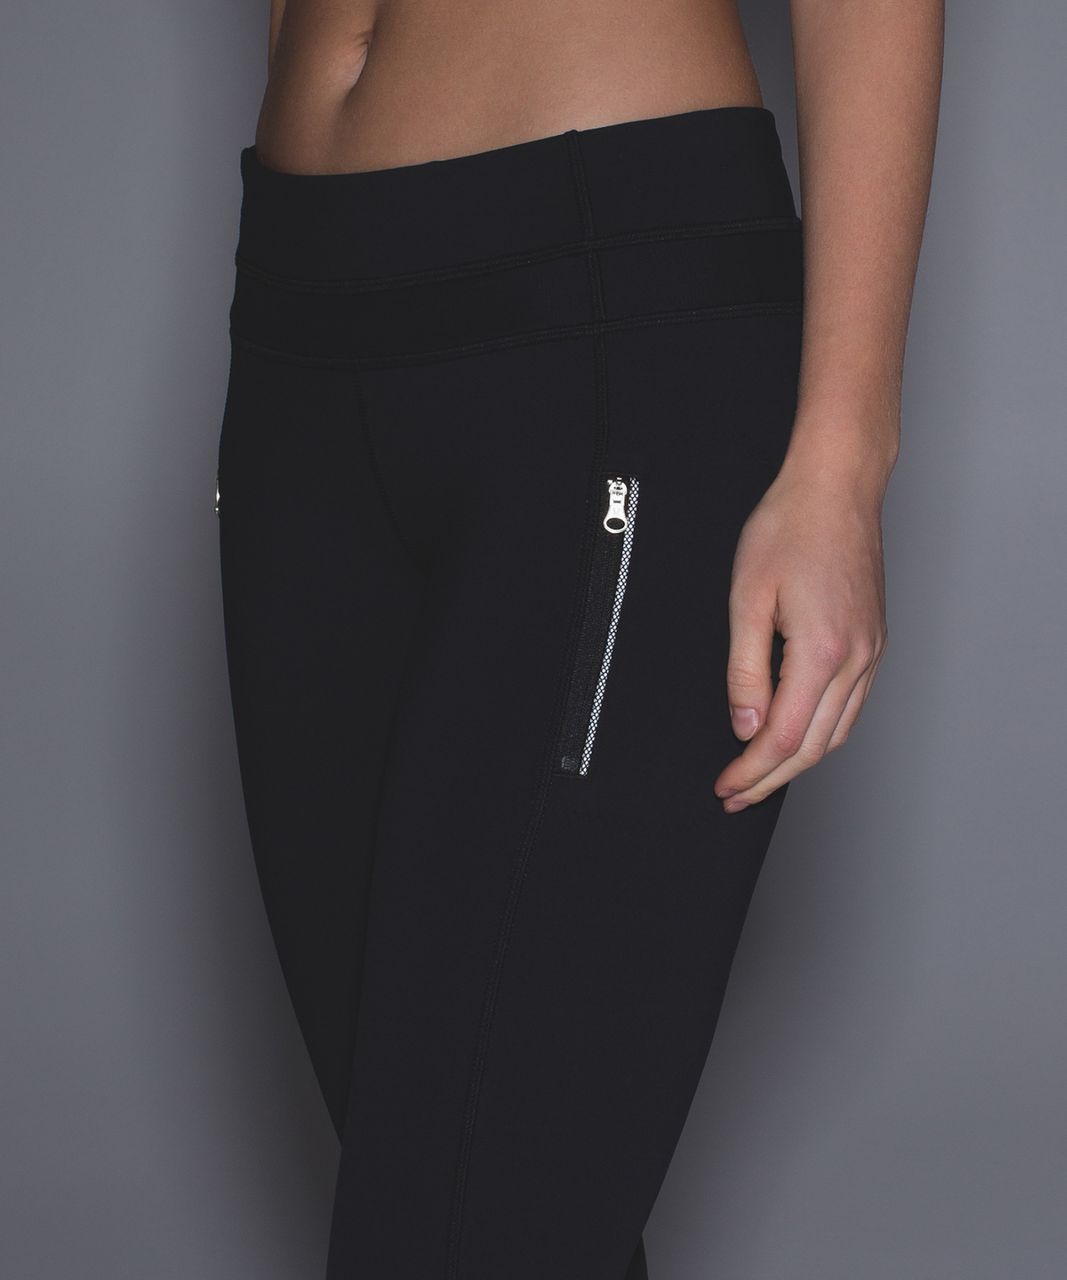 lululemon textured wave inspire tights review 3 - Agent Athletica